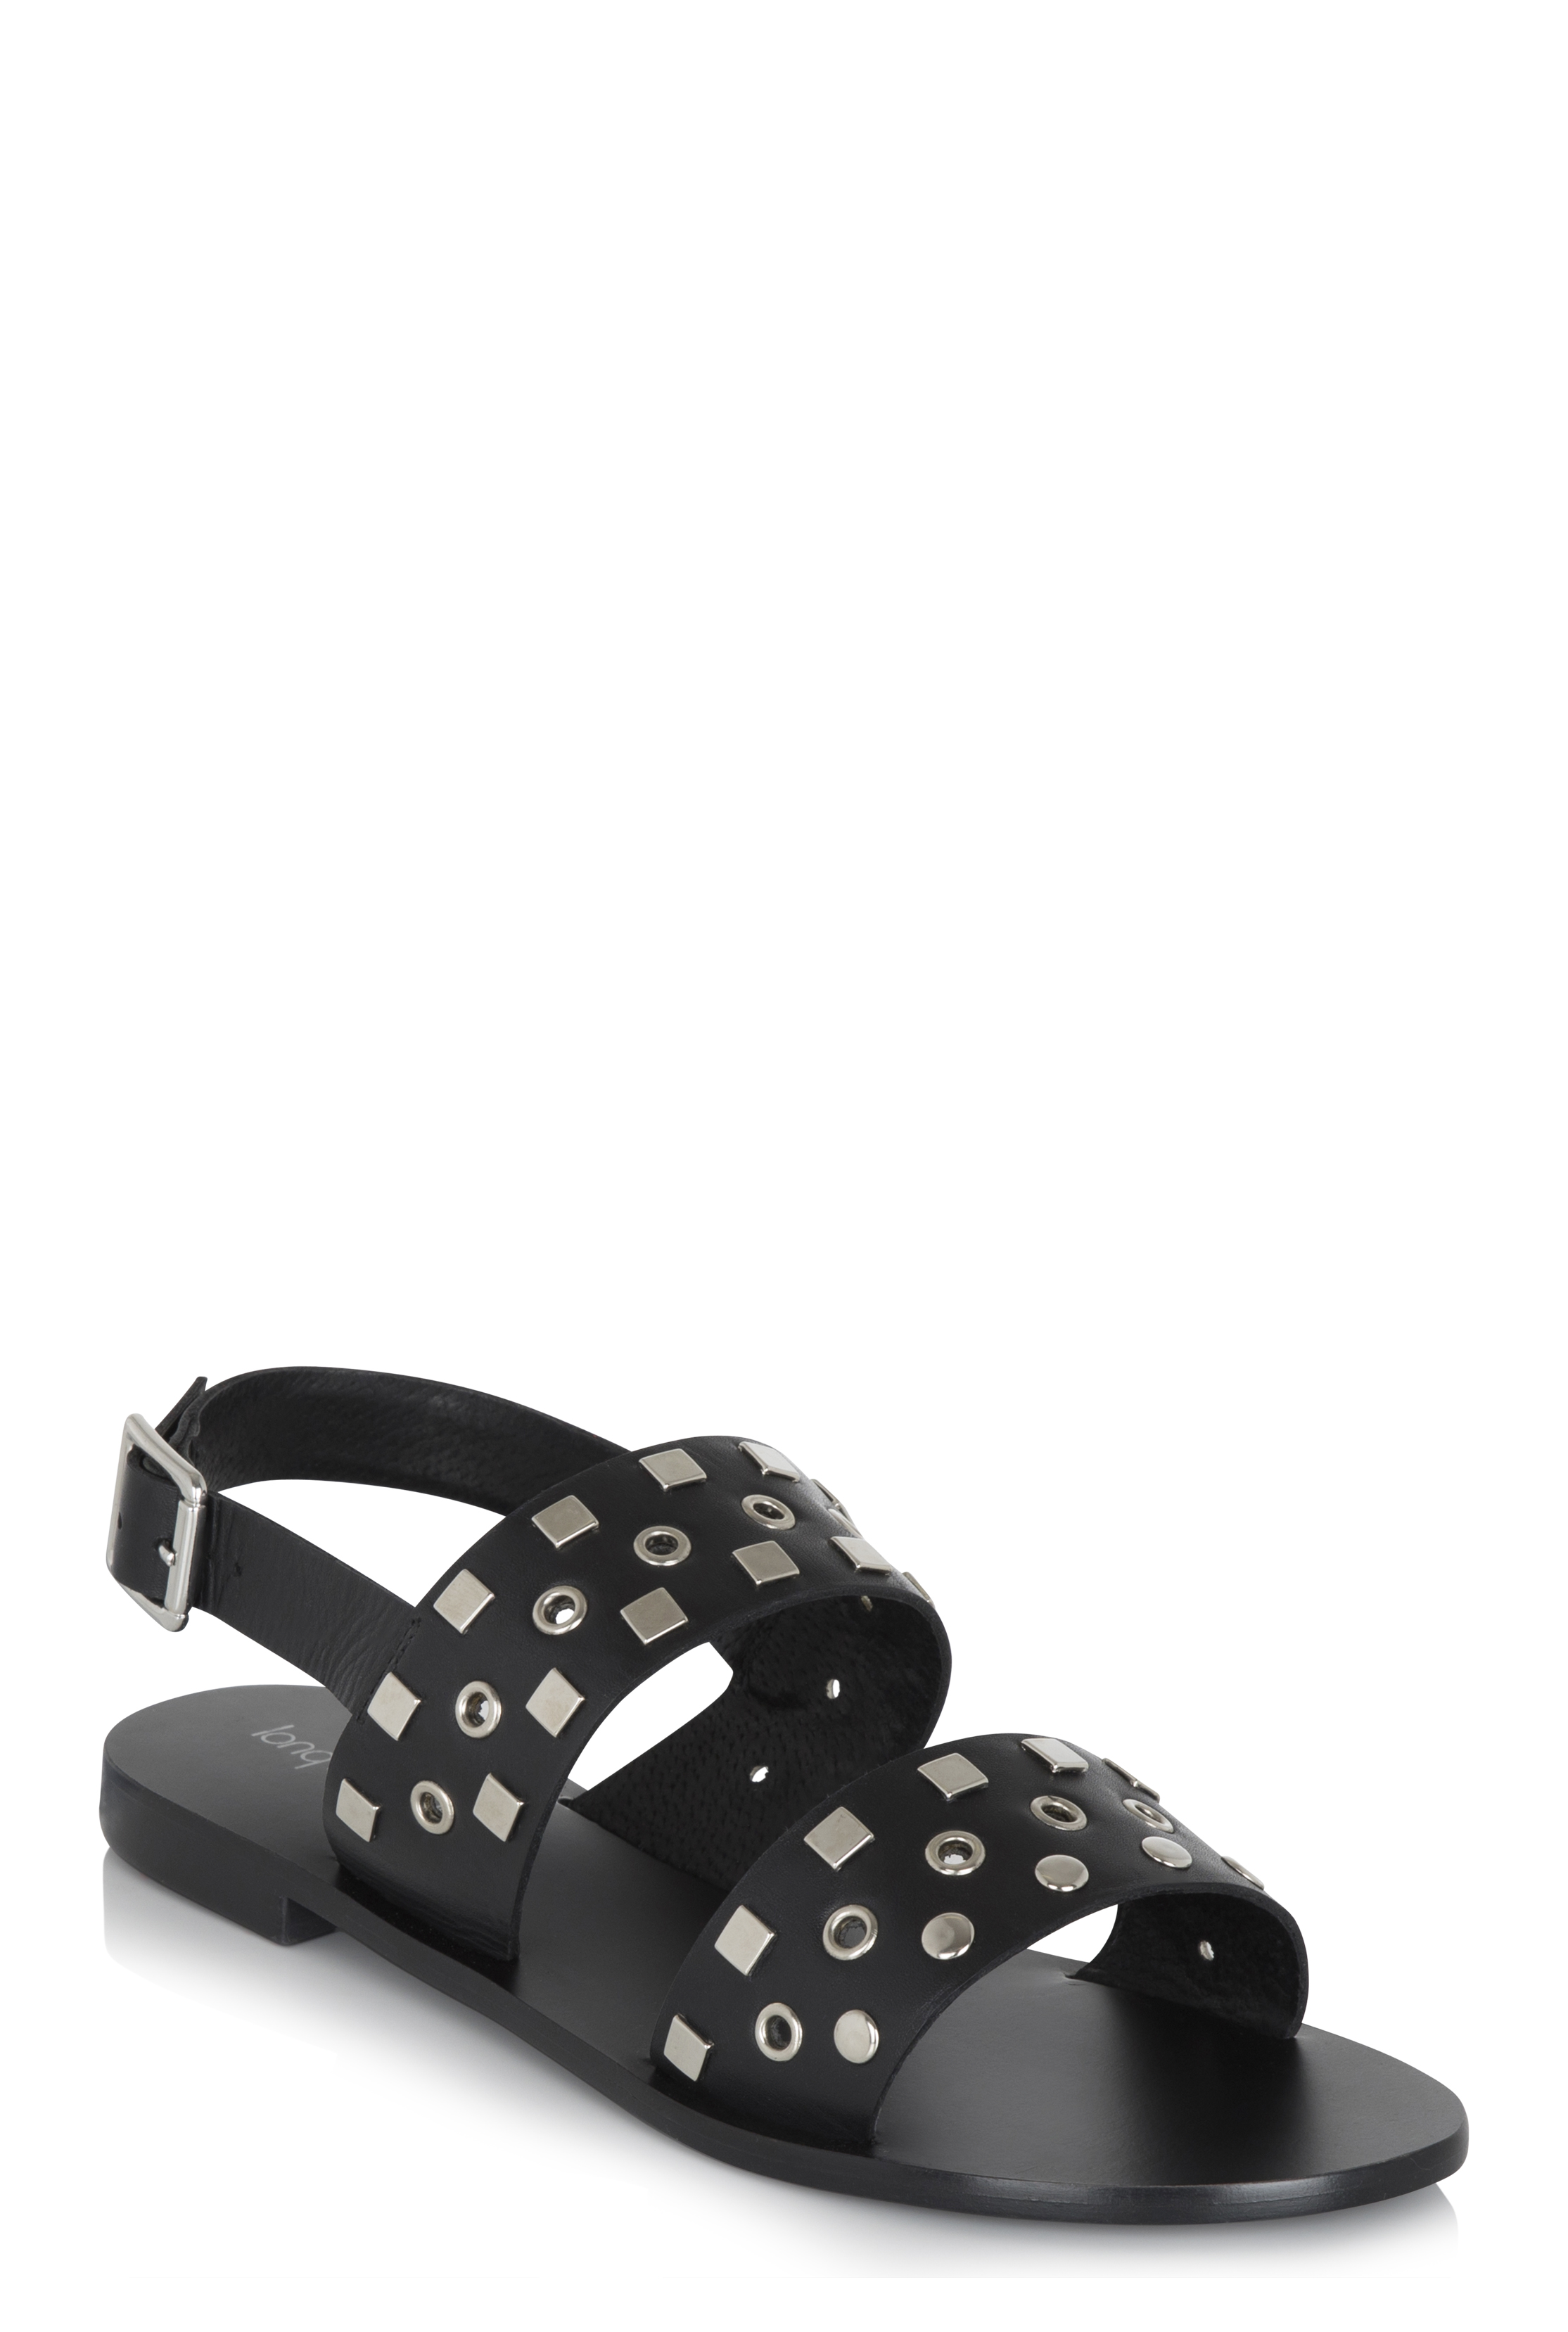 Black Stud Leather Sandals | Long Tall Sally